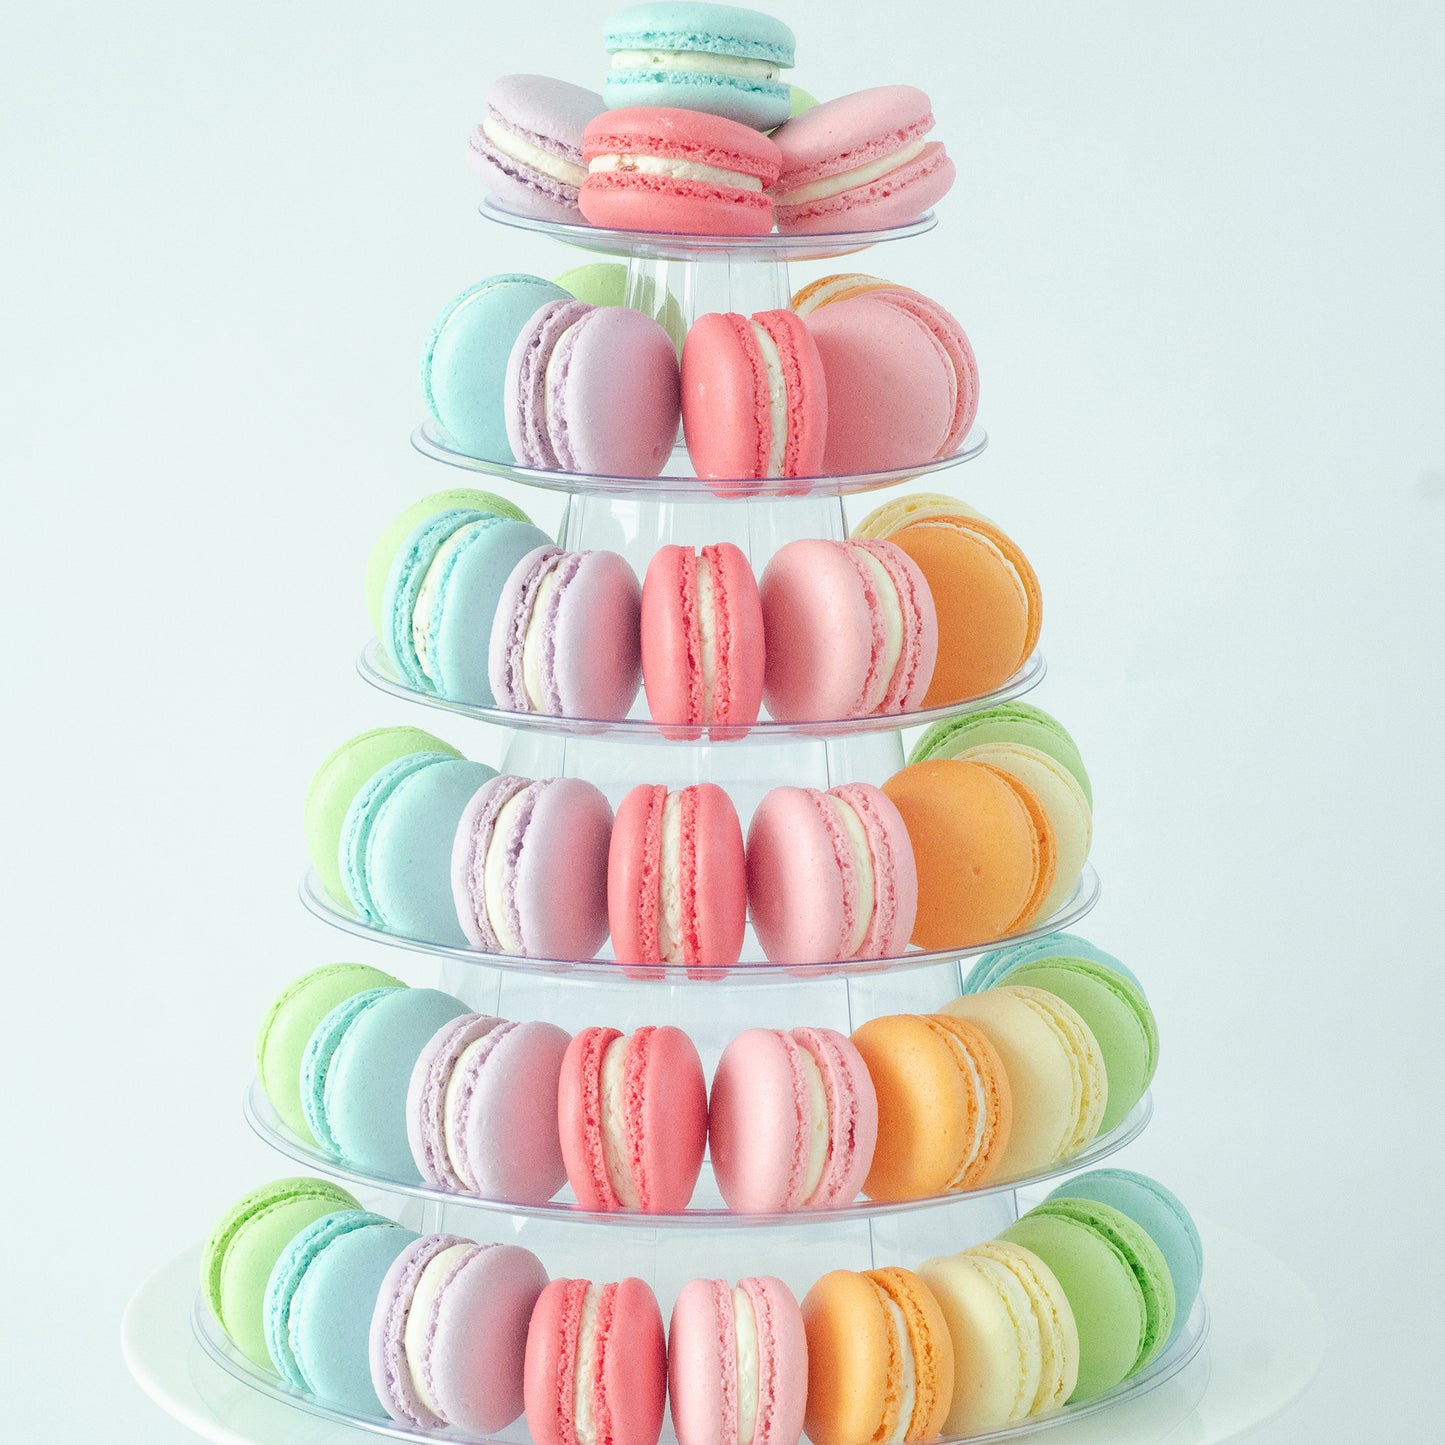 6 Tier Tower (80 pcs Macaron) | Includes Free Tower | Simple Self-Assemble | Free Delivery | $168 Nett Only